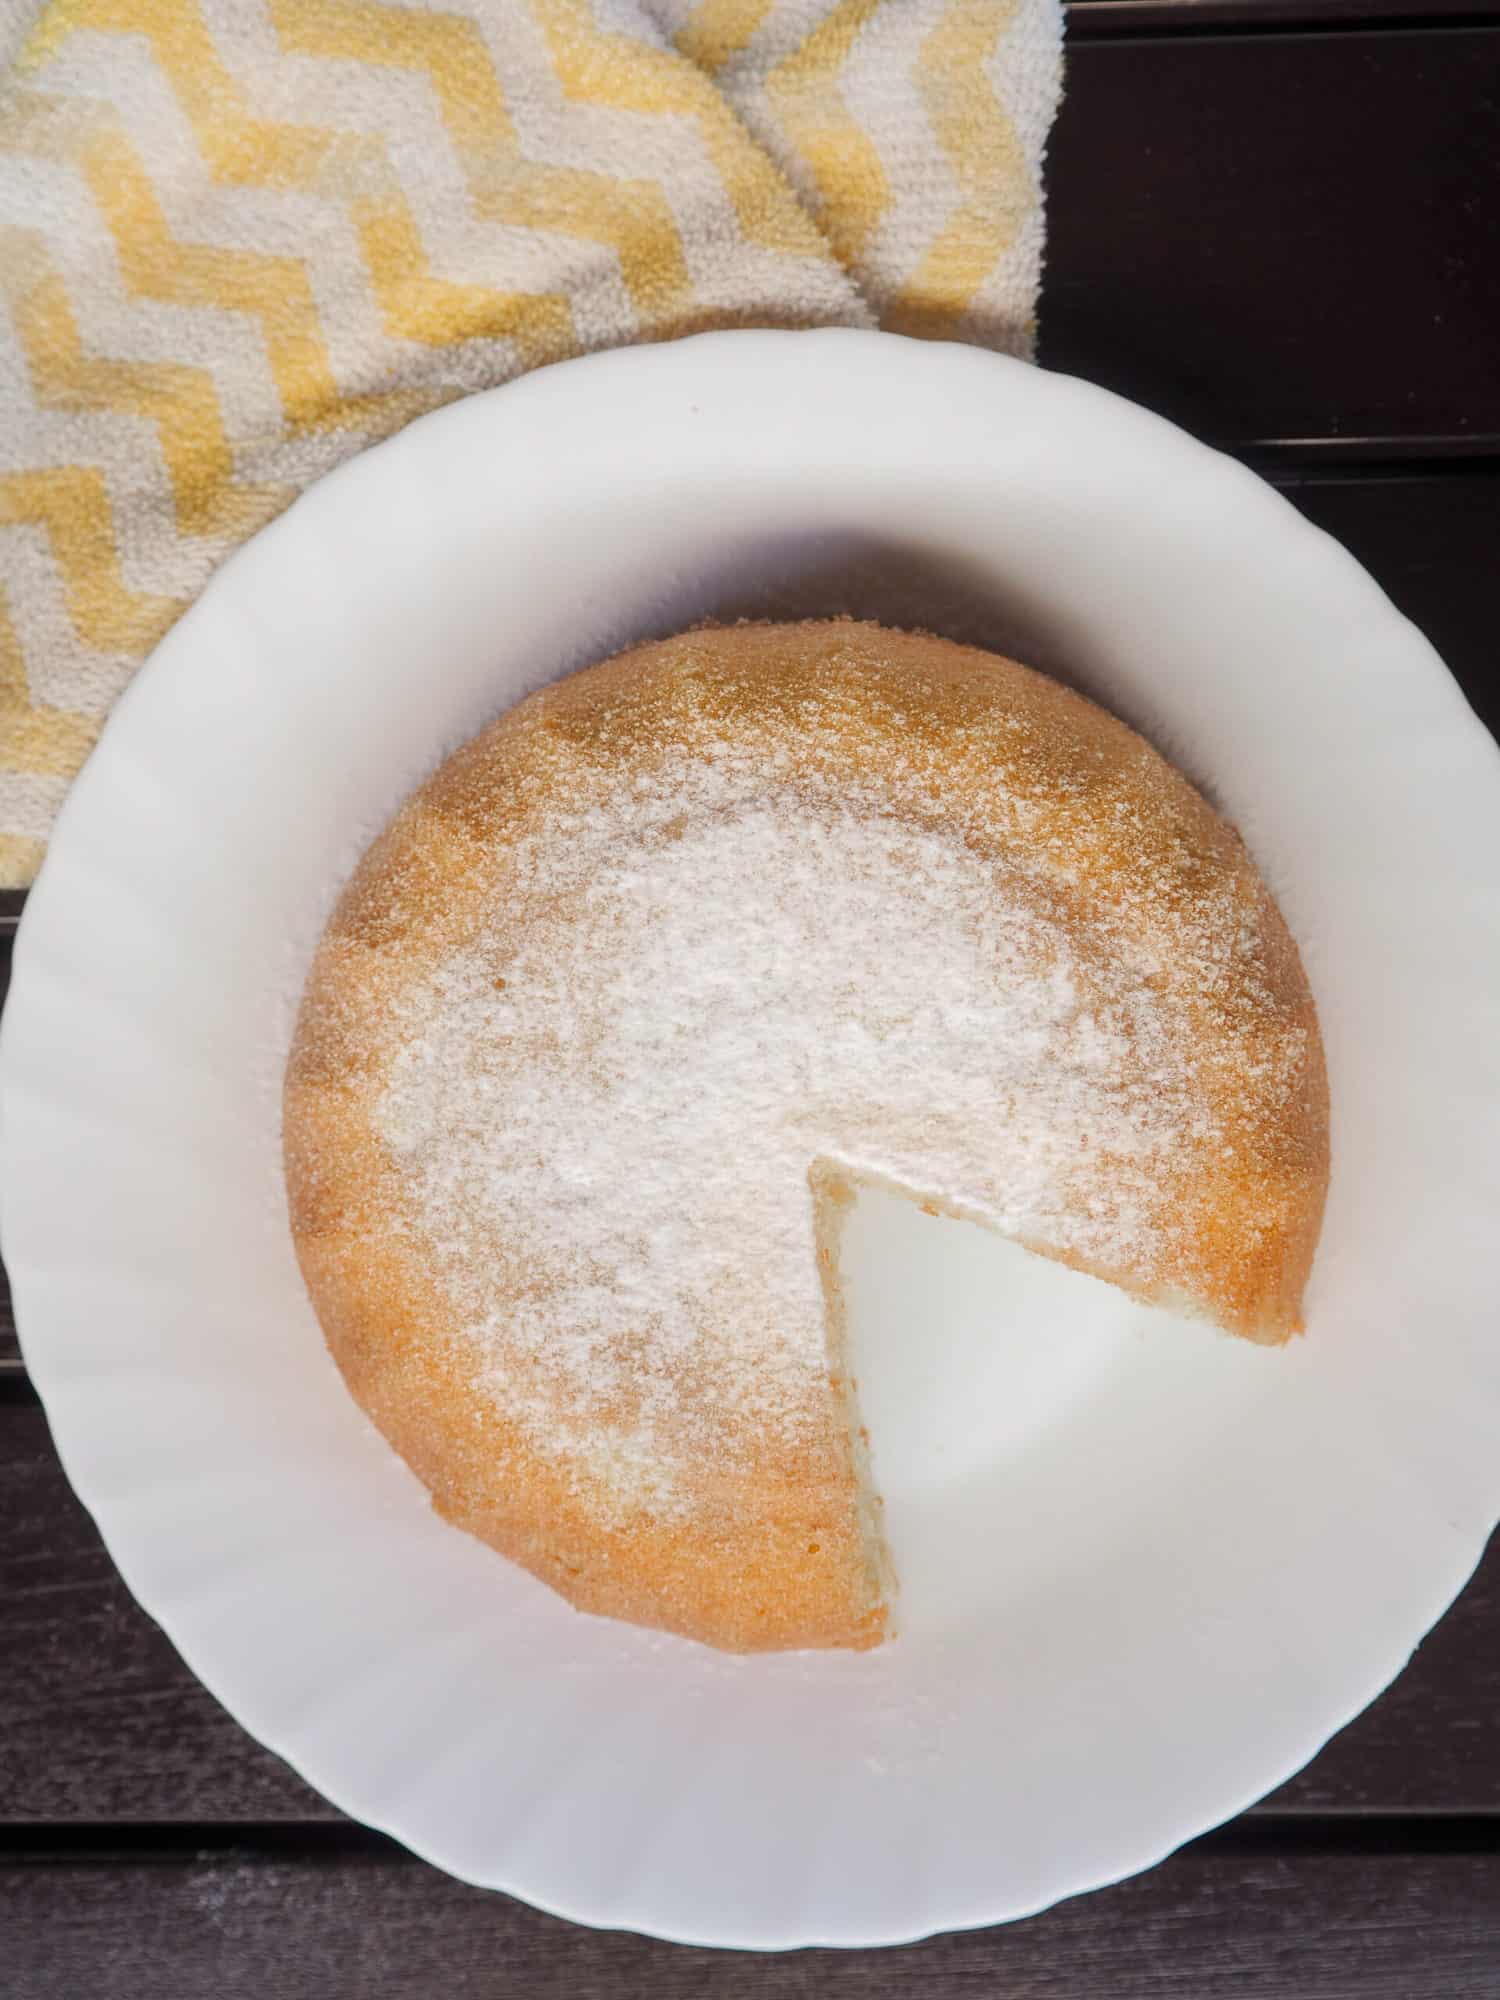 Top view of a bowl shaped cake with powdered sugar topping. A slice of the cake is cut out